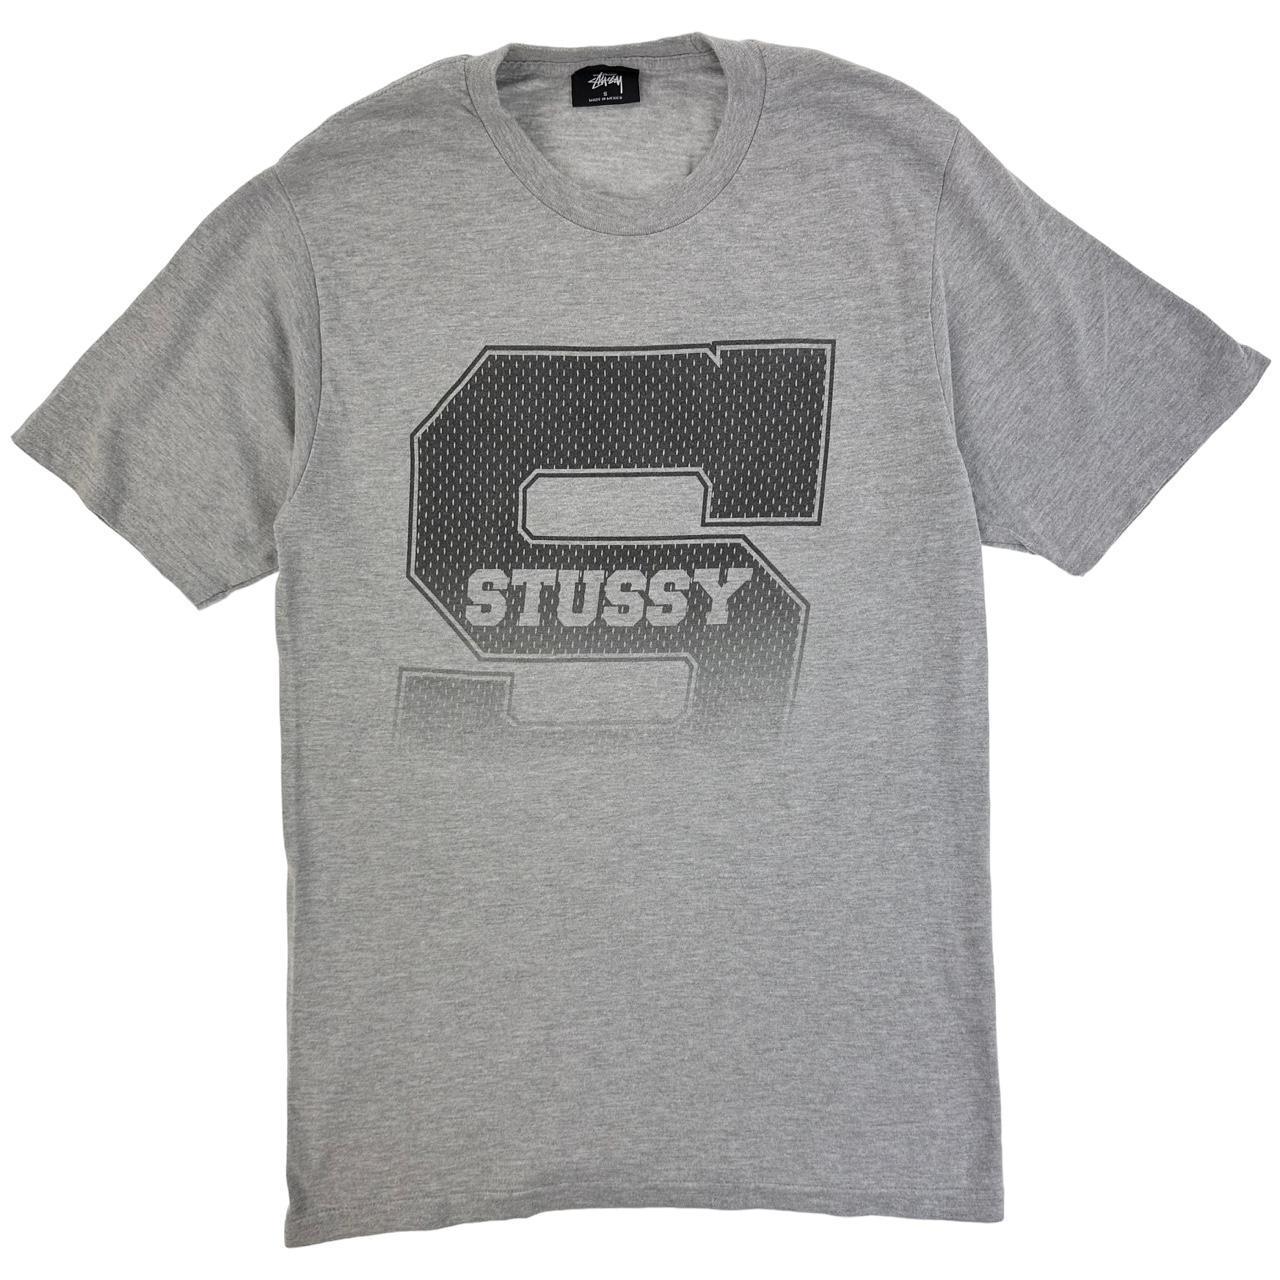 Stussy Fade T Shirt Size S - Known Source